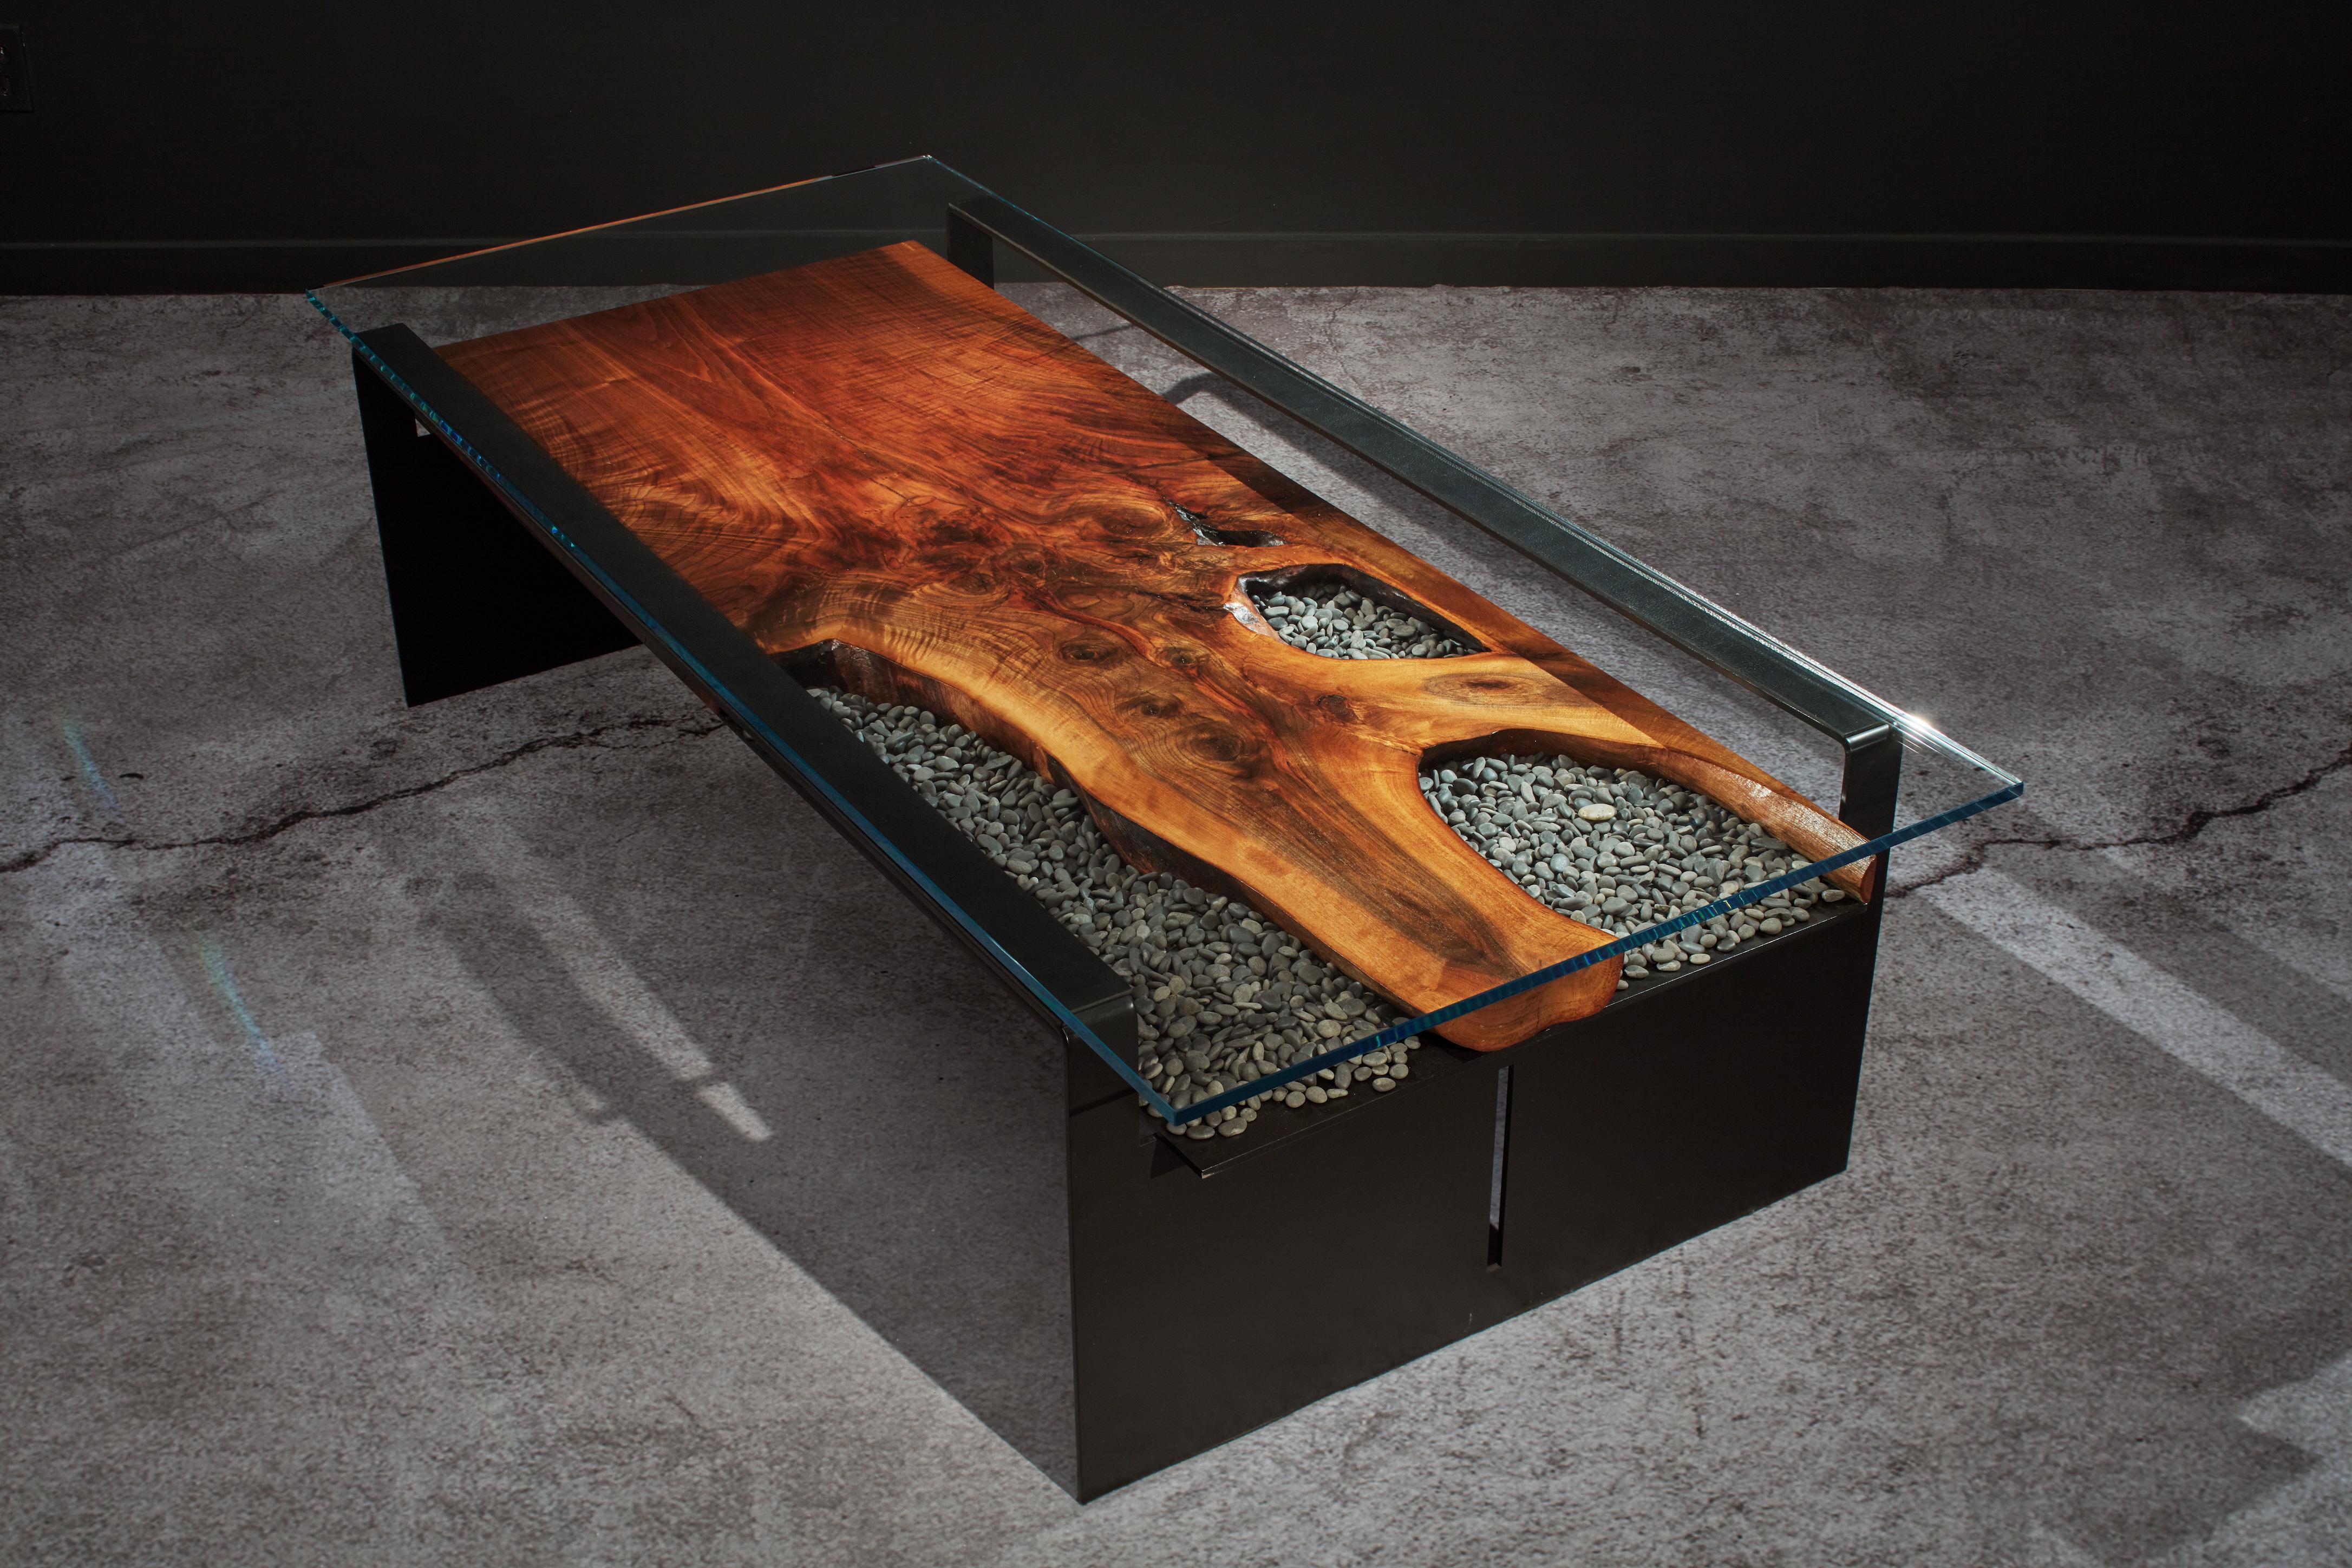 Burnt Forest cocktail table is conceived, designed and created by award-winning artist and architectural designer Michael Olshefski of Primal Modern. Inspired by nature's rebirth after fire, the gorgeous highly figured Black Walnut is conceived as a